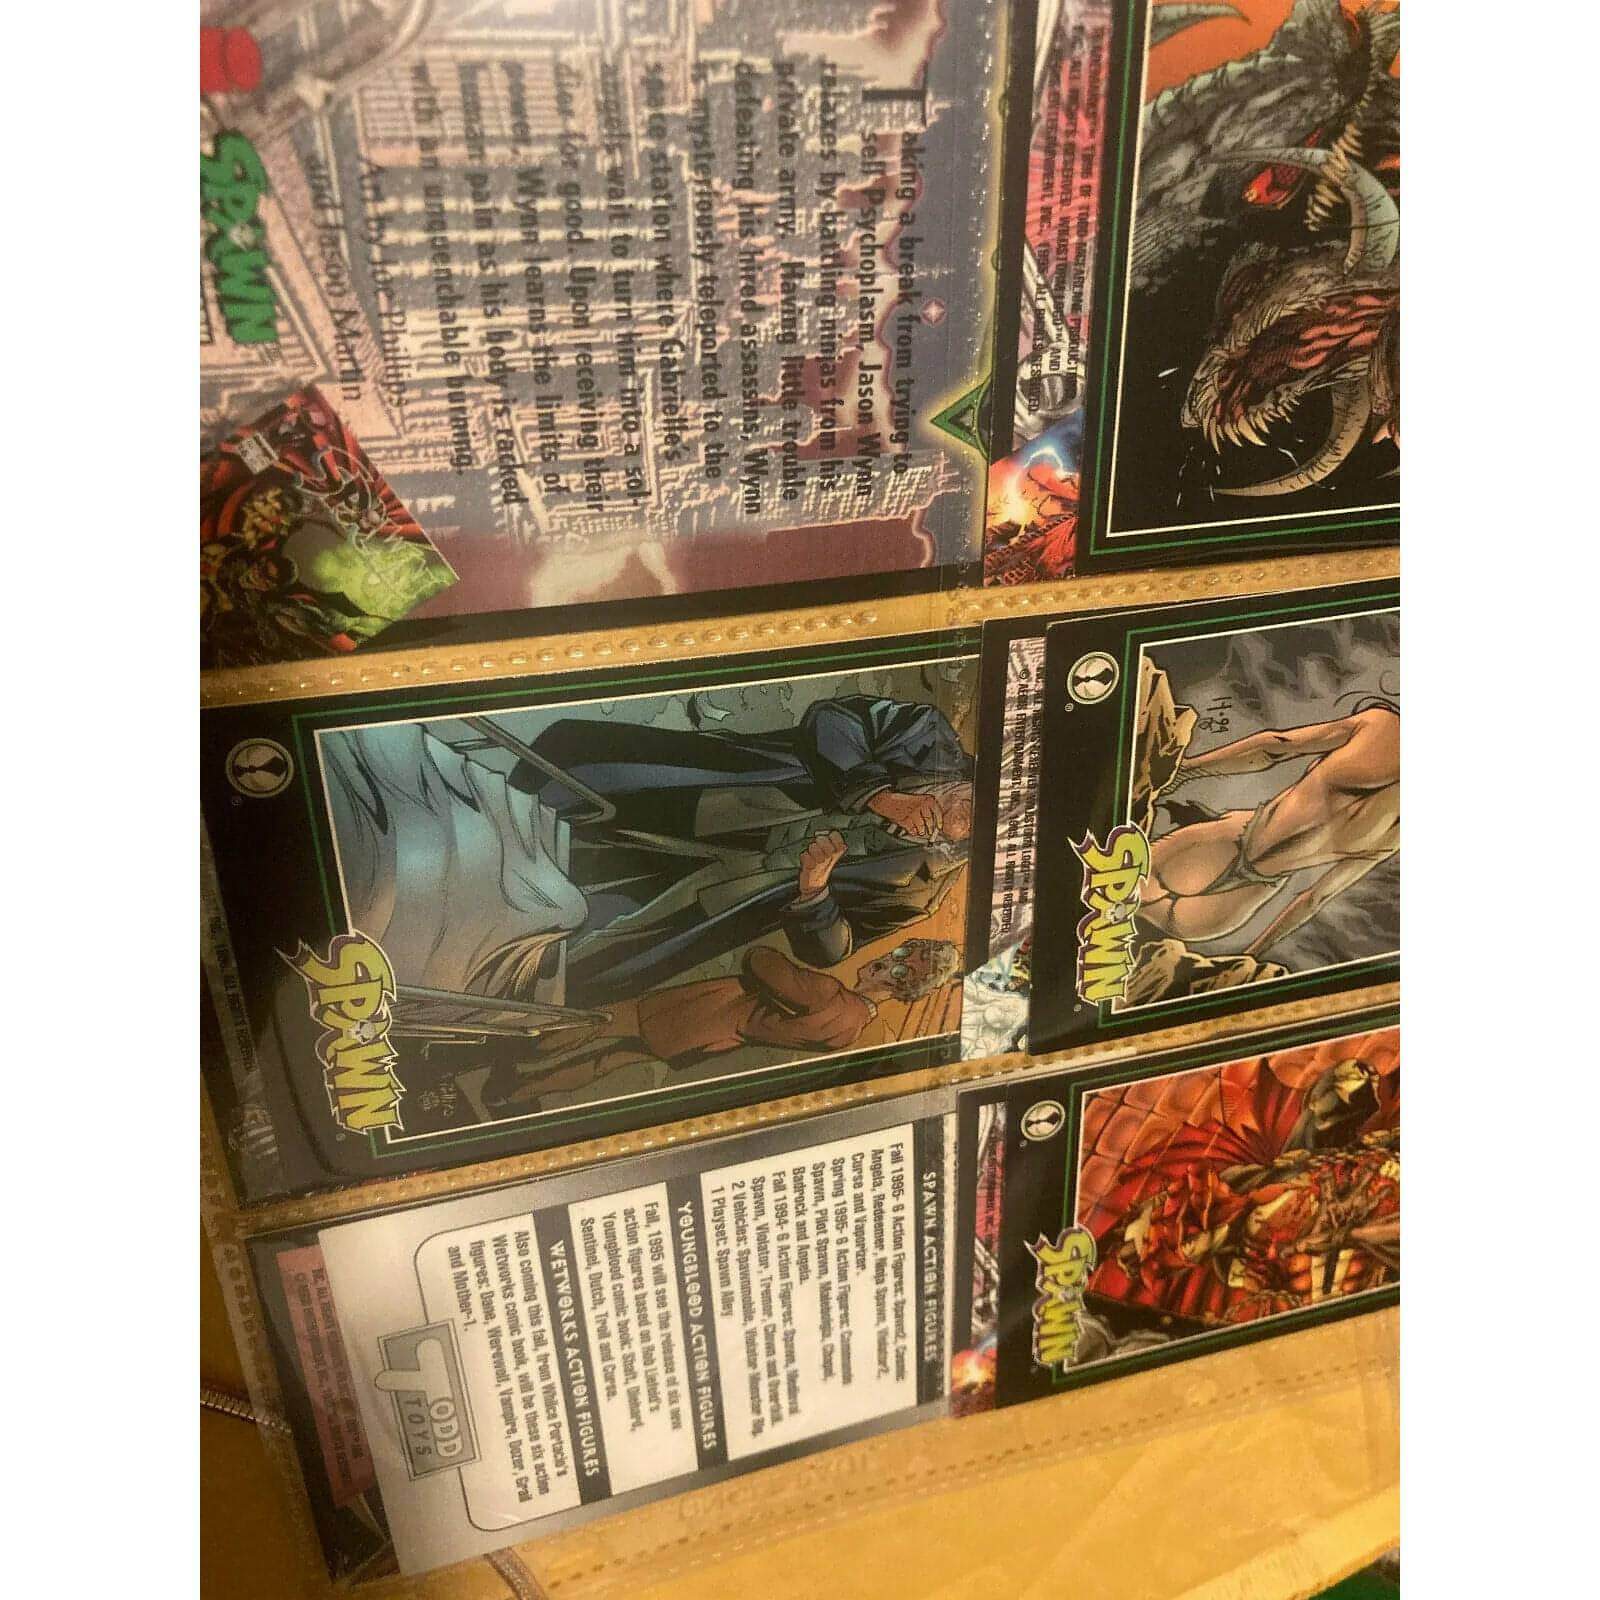 Spawn Cards [Lot - Small Set - More Trading Cards Here!] BooksCardsNBikes